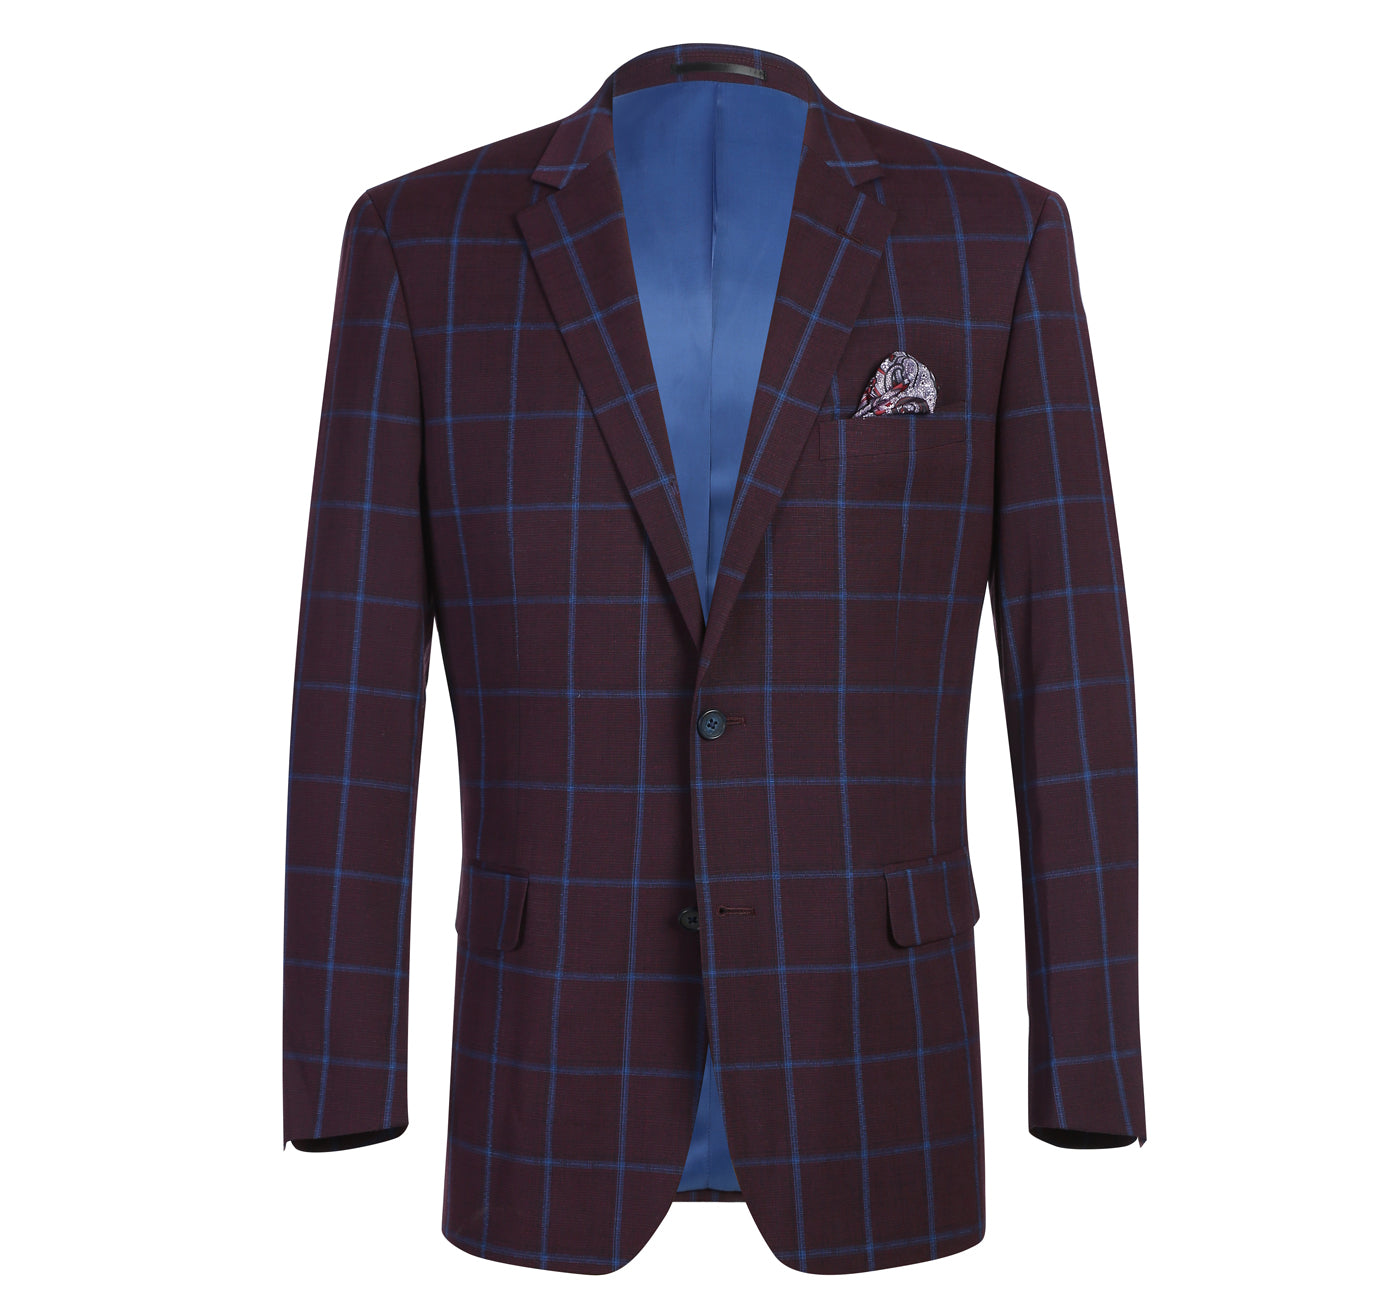 Men’s Slim Fit Two Button Burgundy with Blue Check Blazer Sport Coat 2